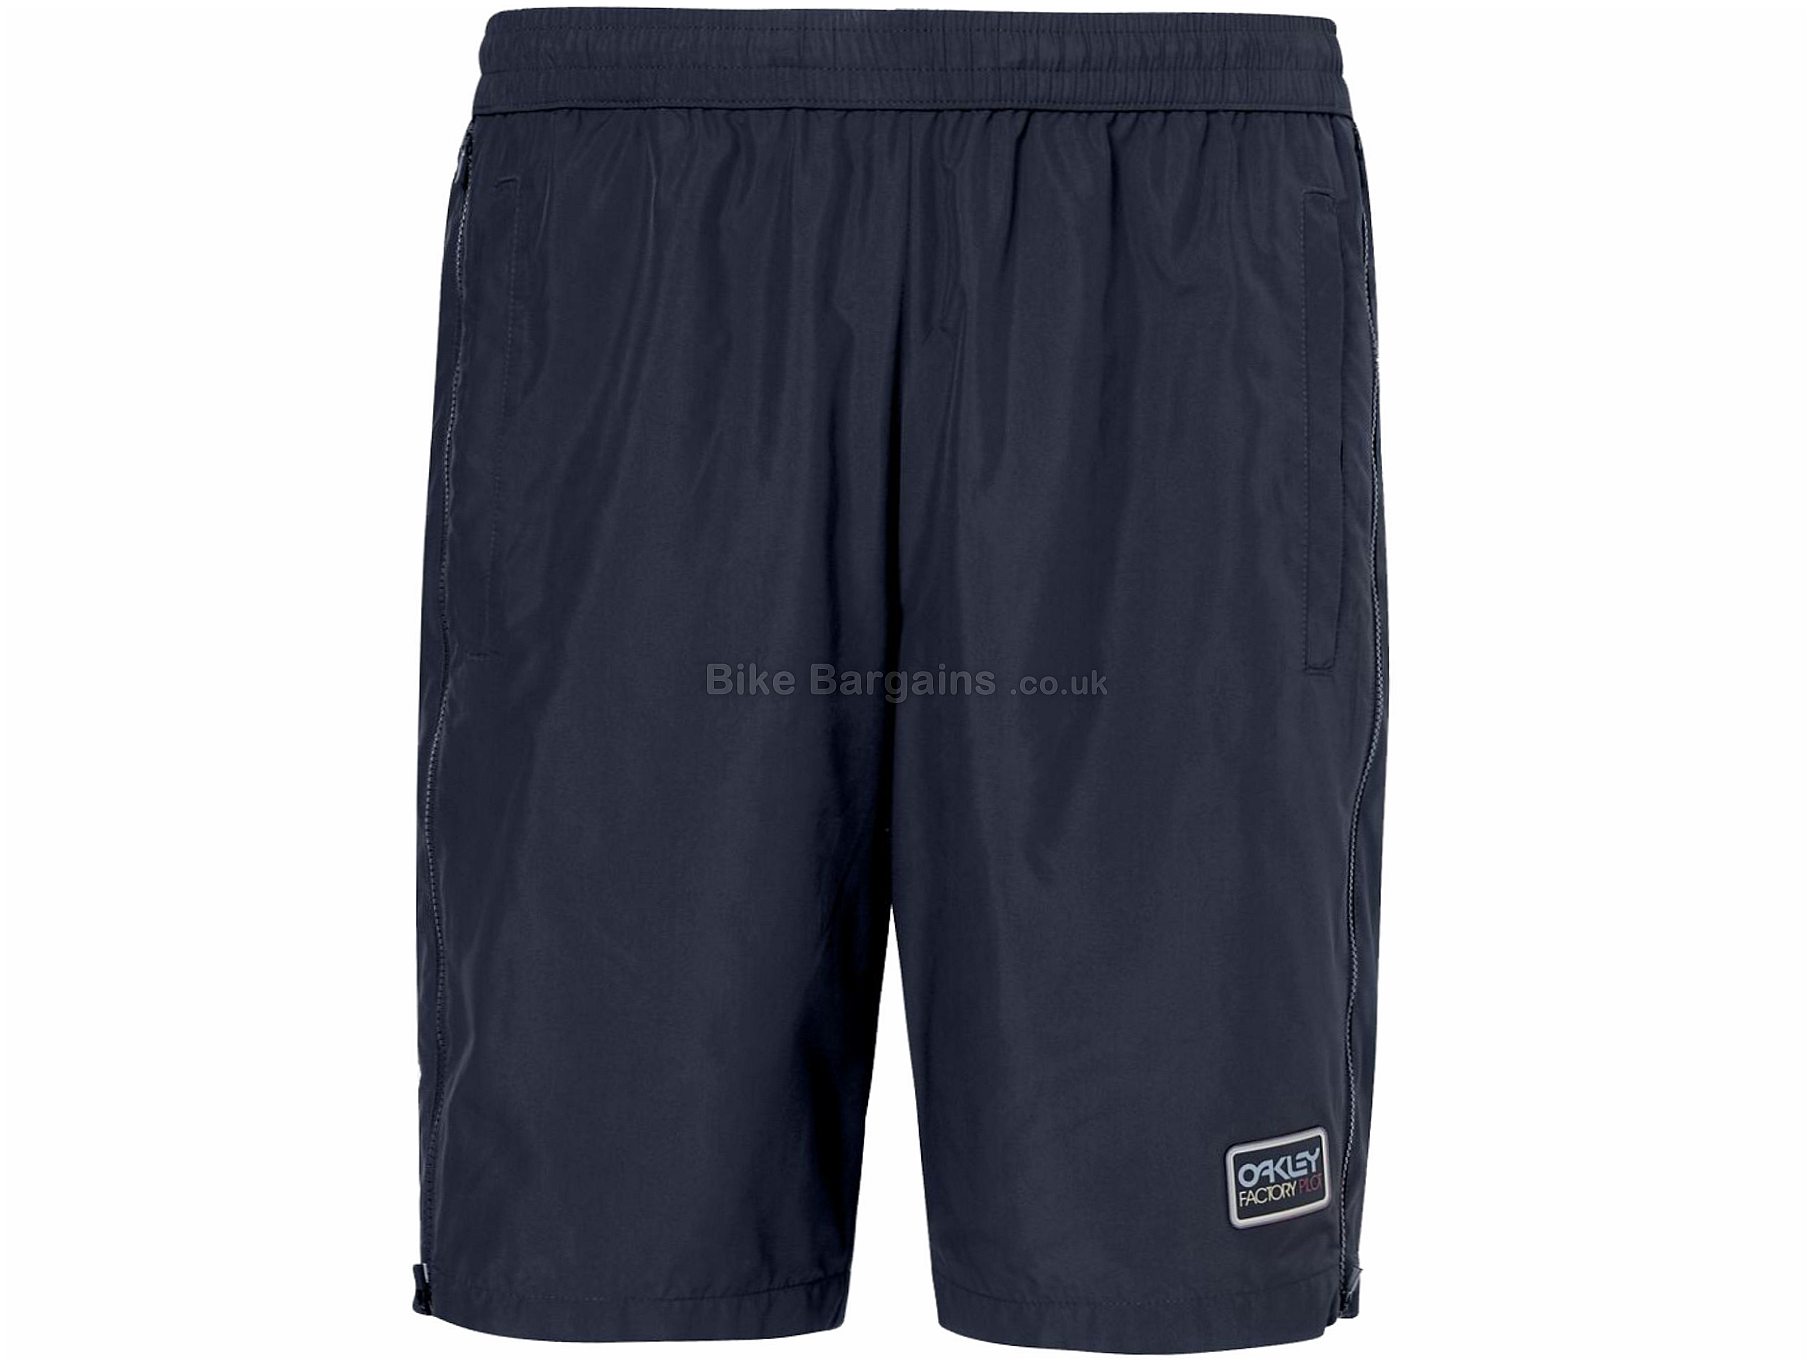 Oakley Ventilation Track Shorts (Expired) was £18